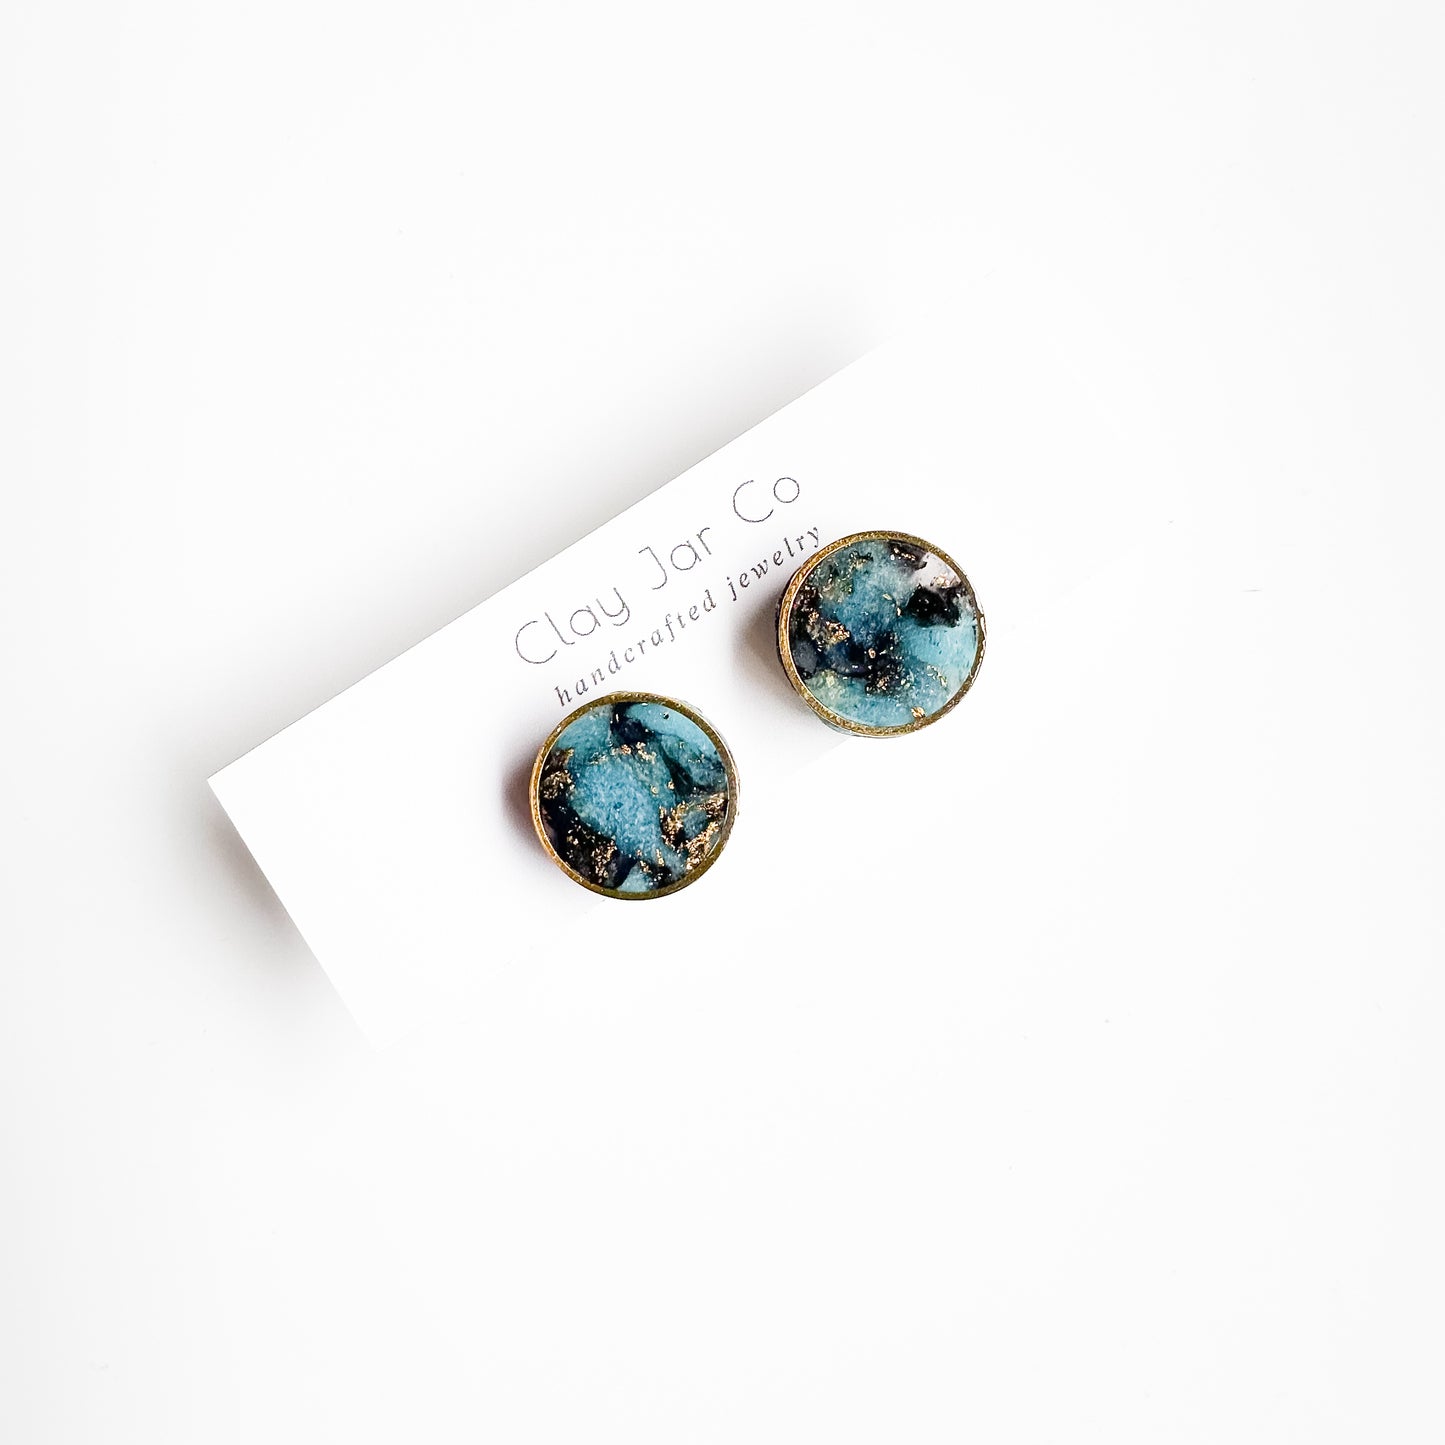 Cecilia Stud Earrings in Midnight Marble